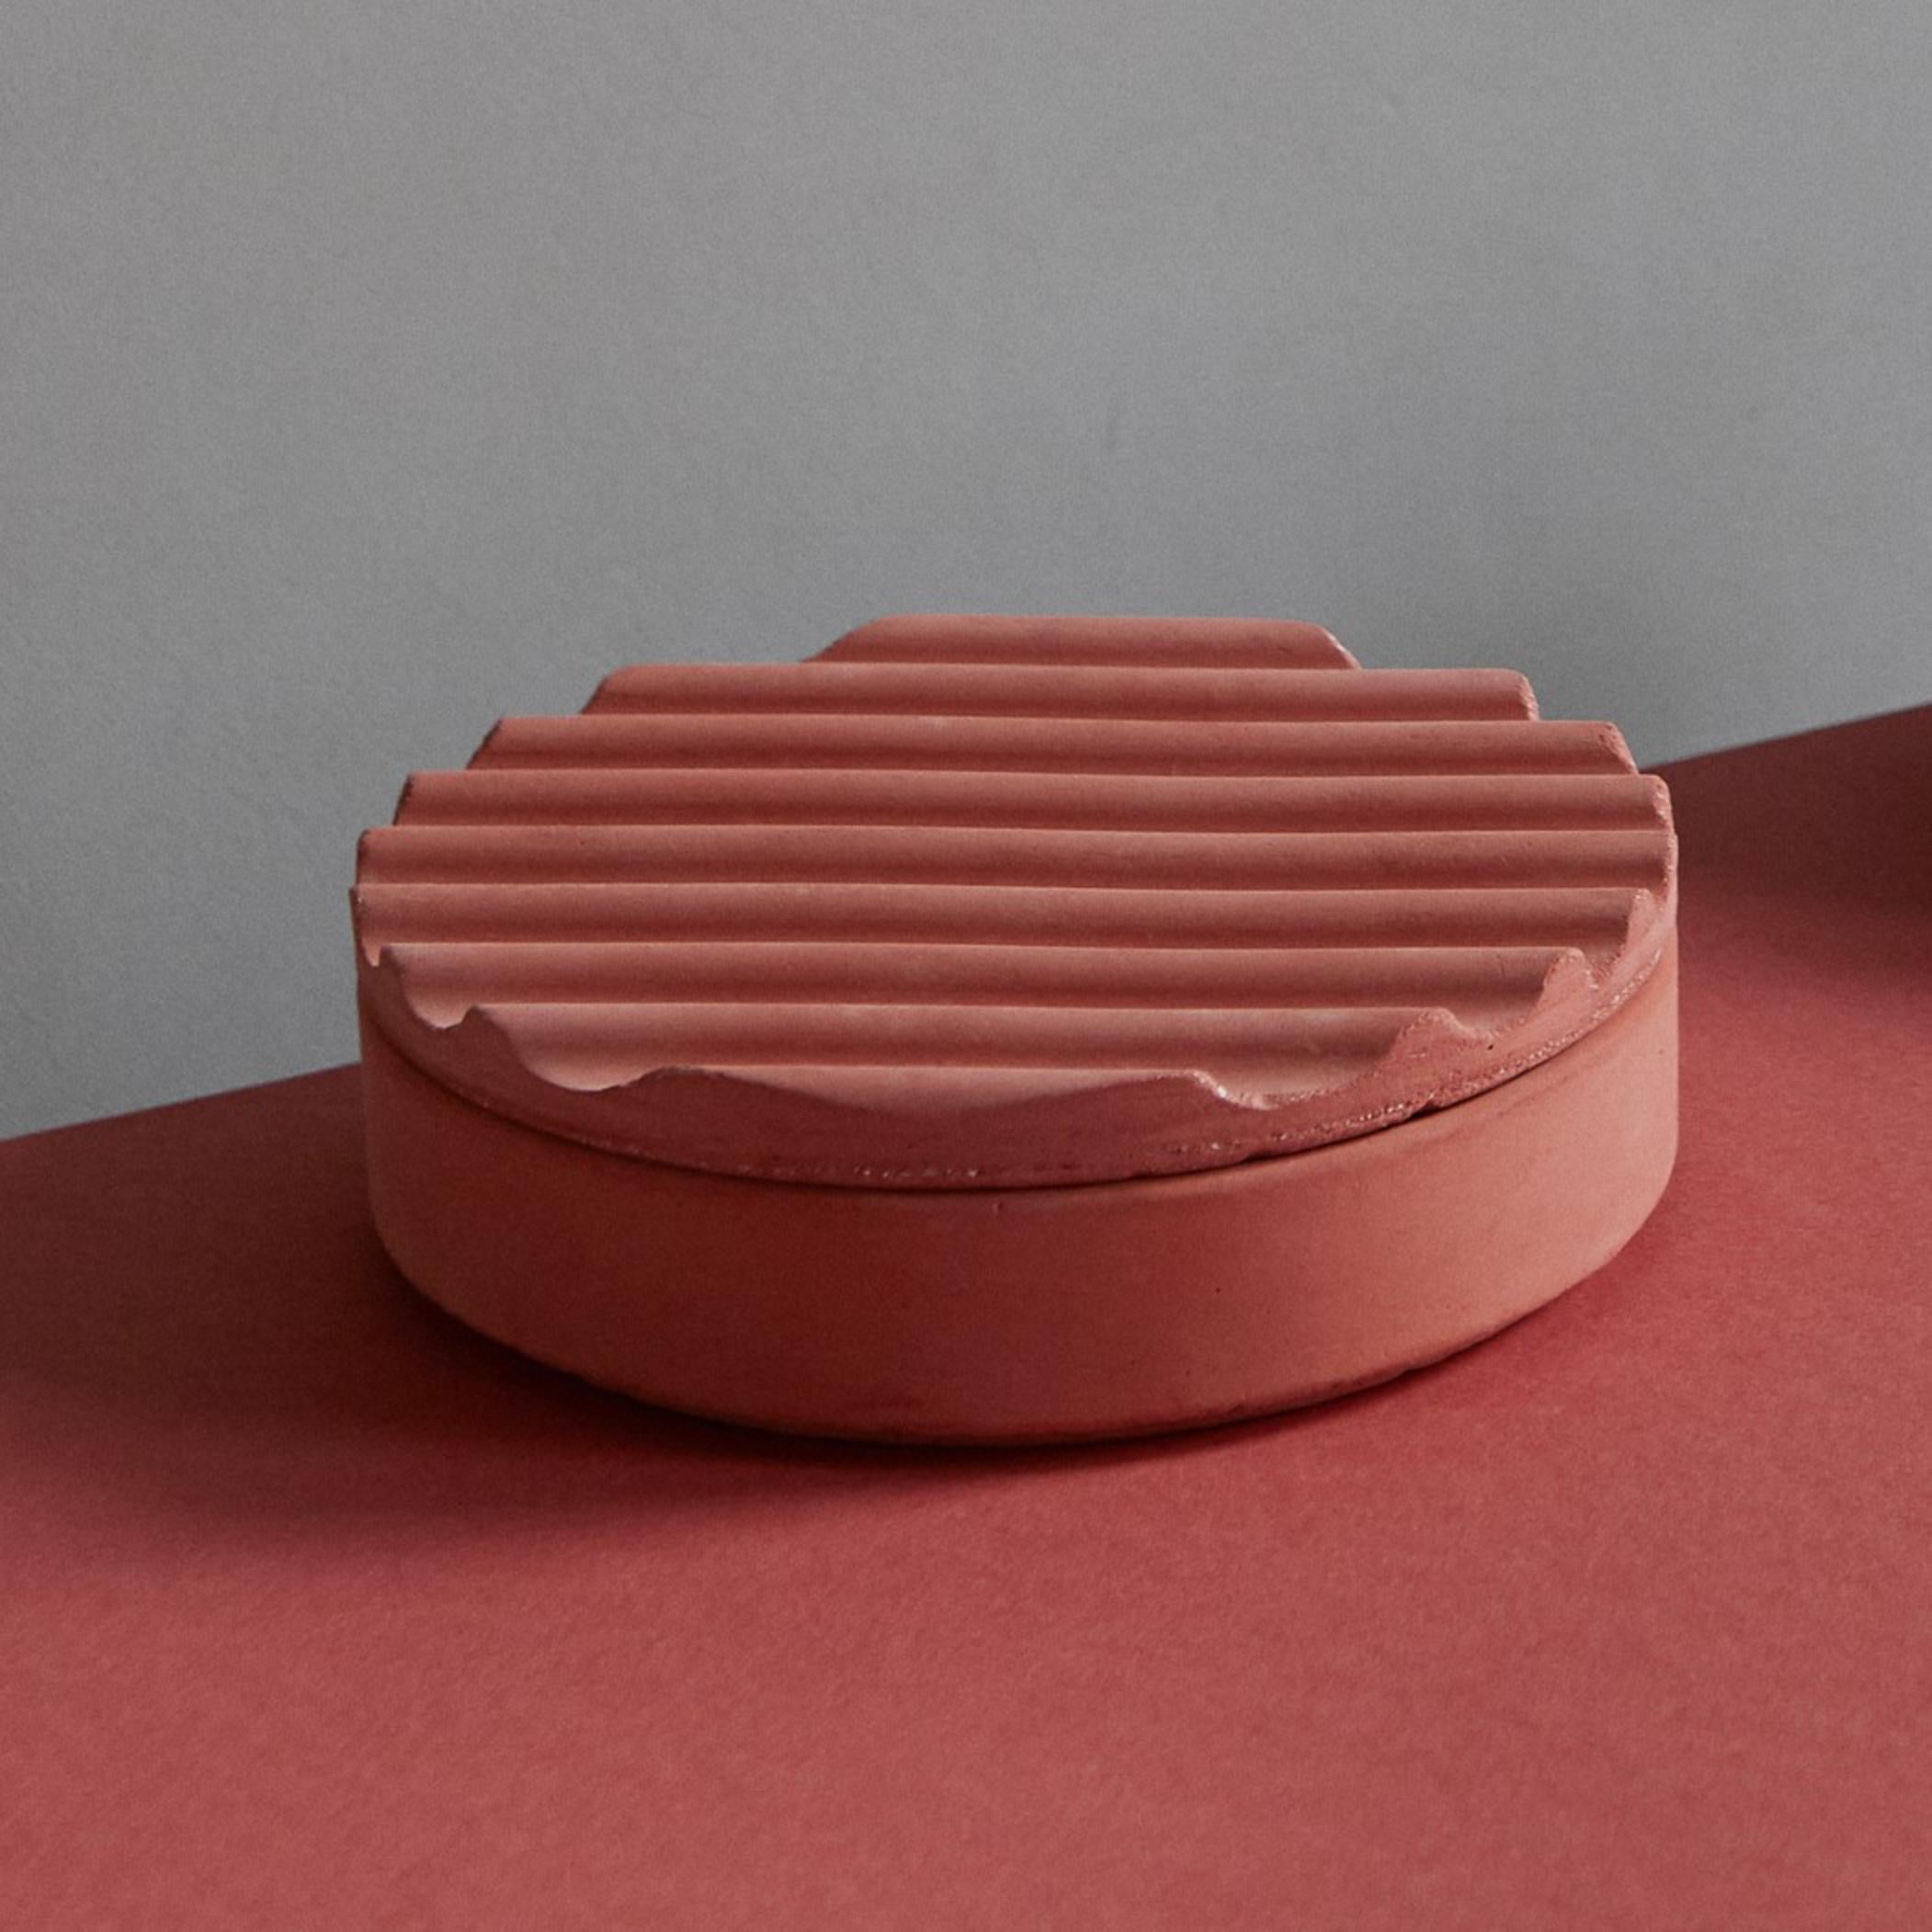 Set of 2 ripple vessels by Derya Arpac
Dimensions: D 17 x H 7 cm
Materials: Pigmented Concrete
Also Available: Other colours available.

Derya Arpac is a Copenhagen based architect and furniture designer.
She holds a Master of Arts in